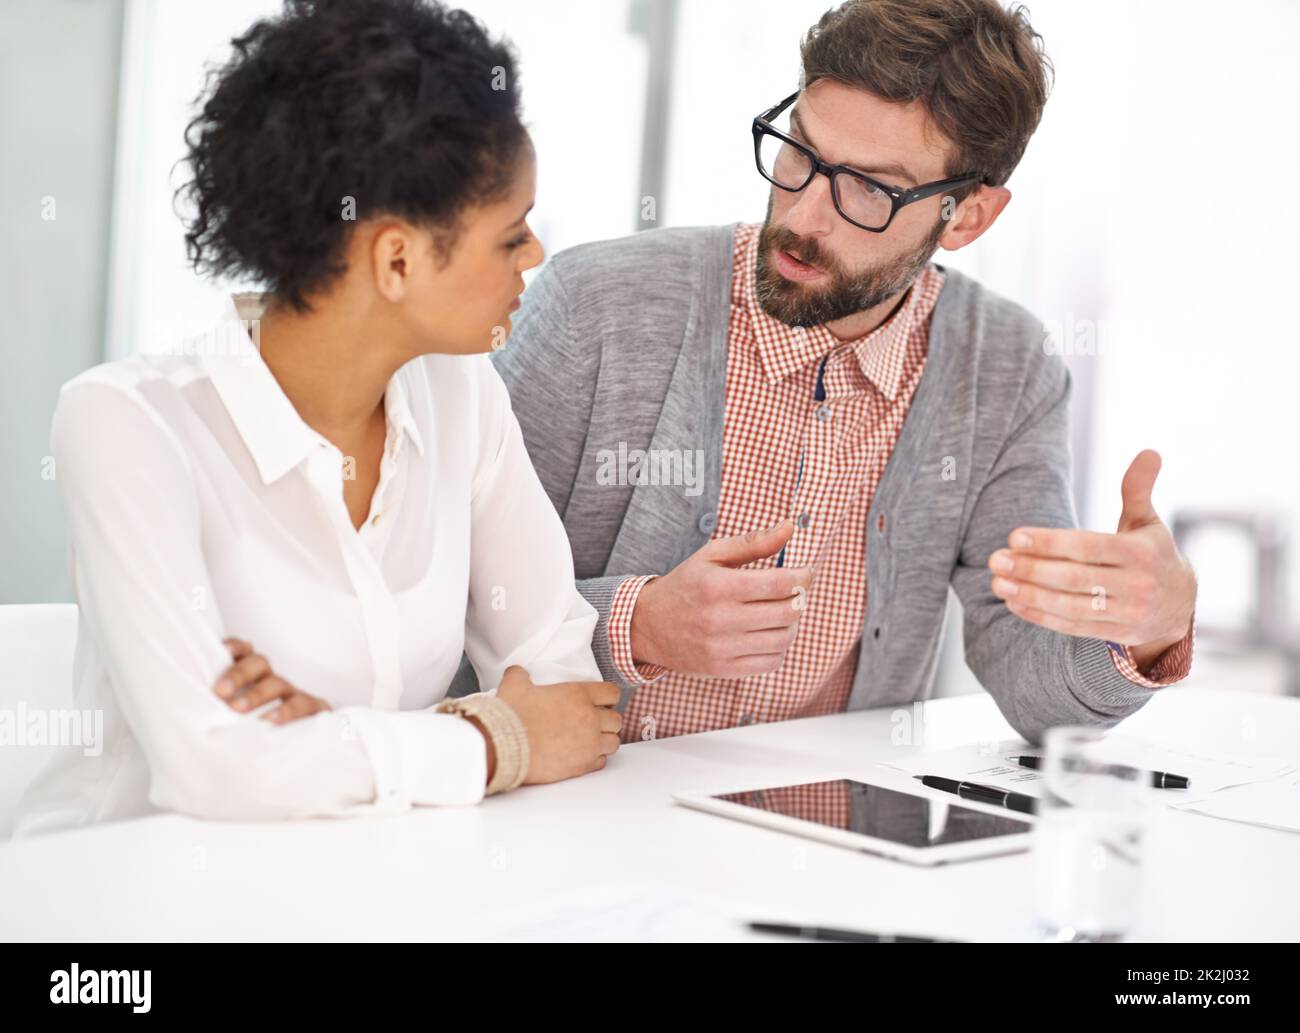 Making his point. Shot of two young business professionals having a meeting. Stock Photo